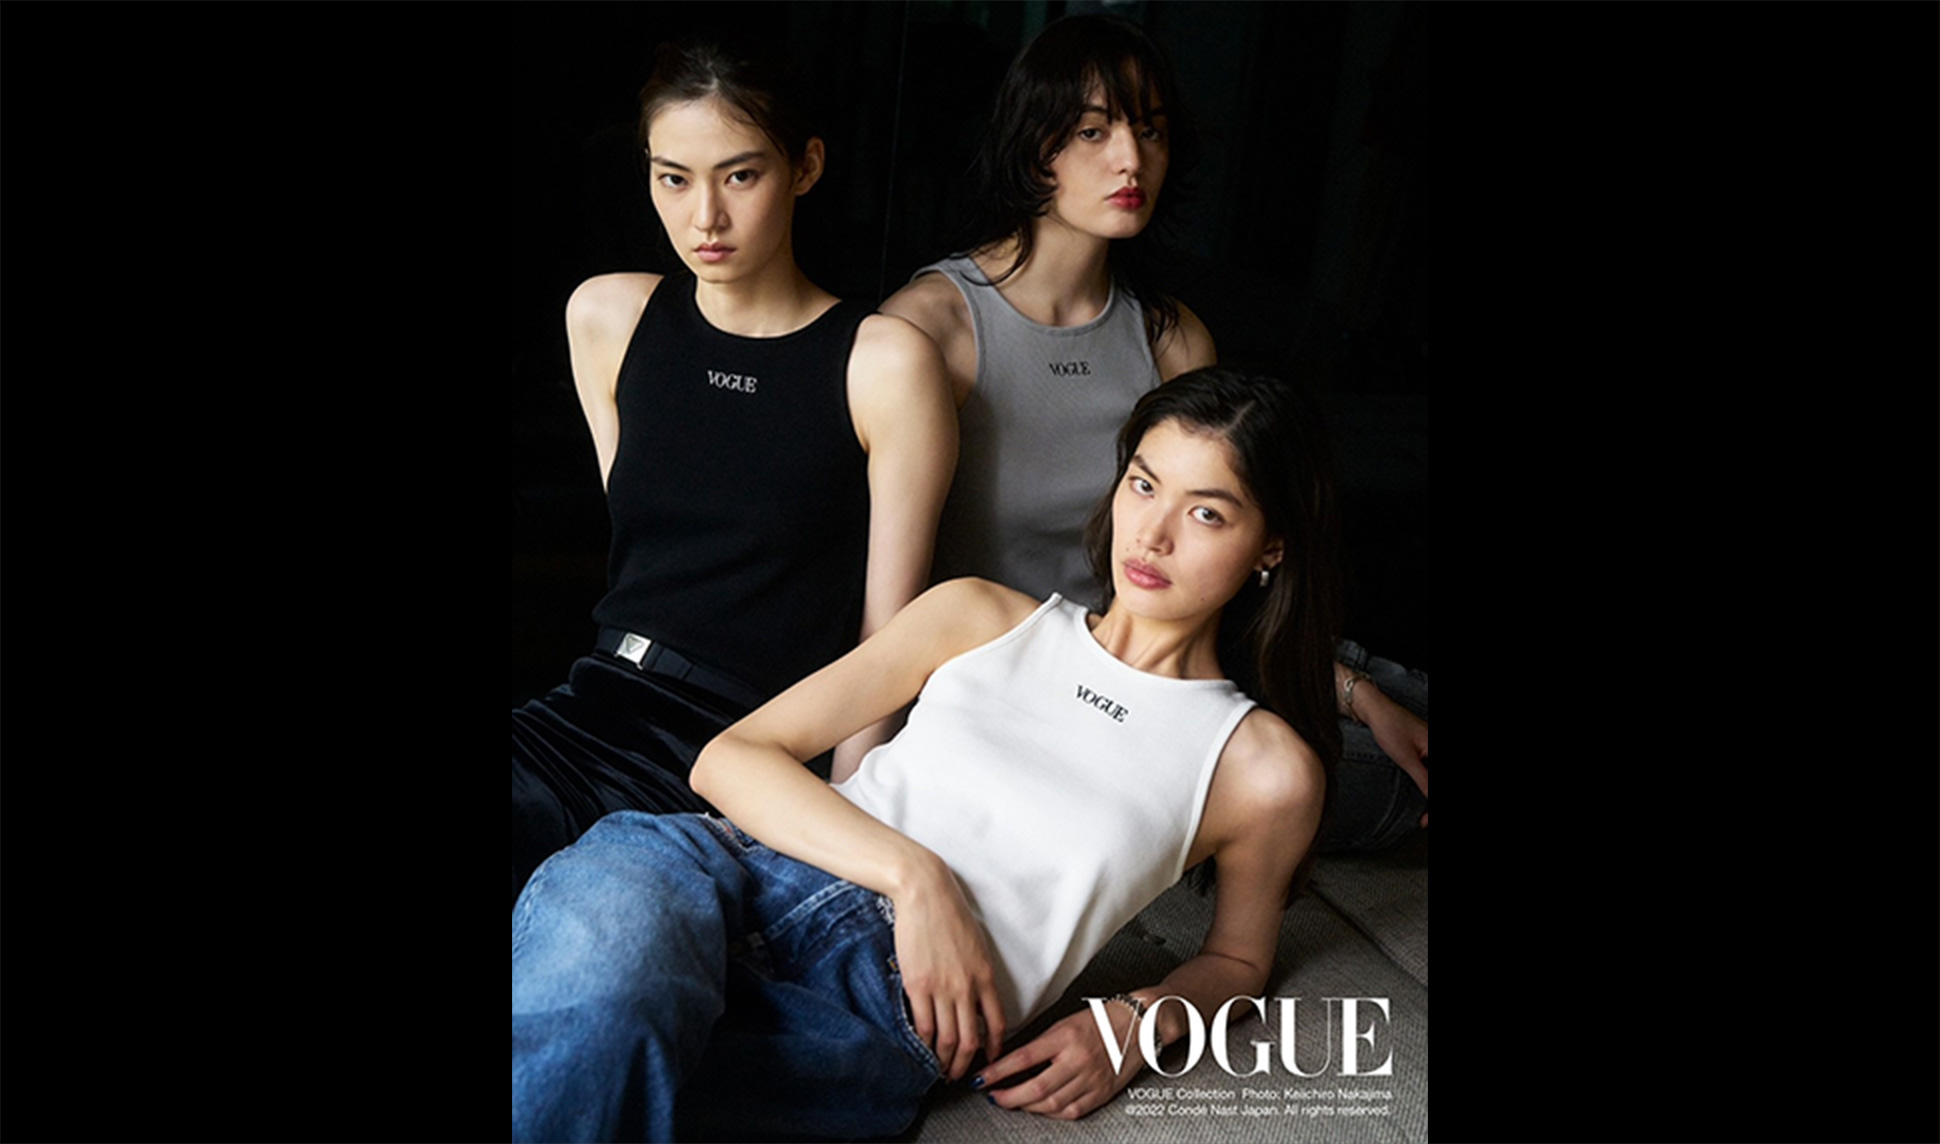 VOGUE Collection